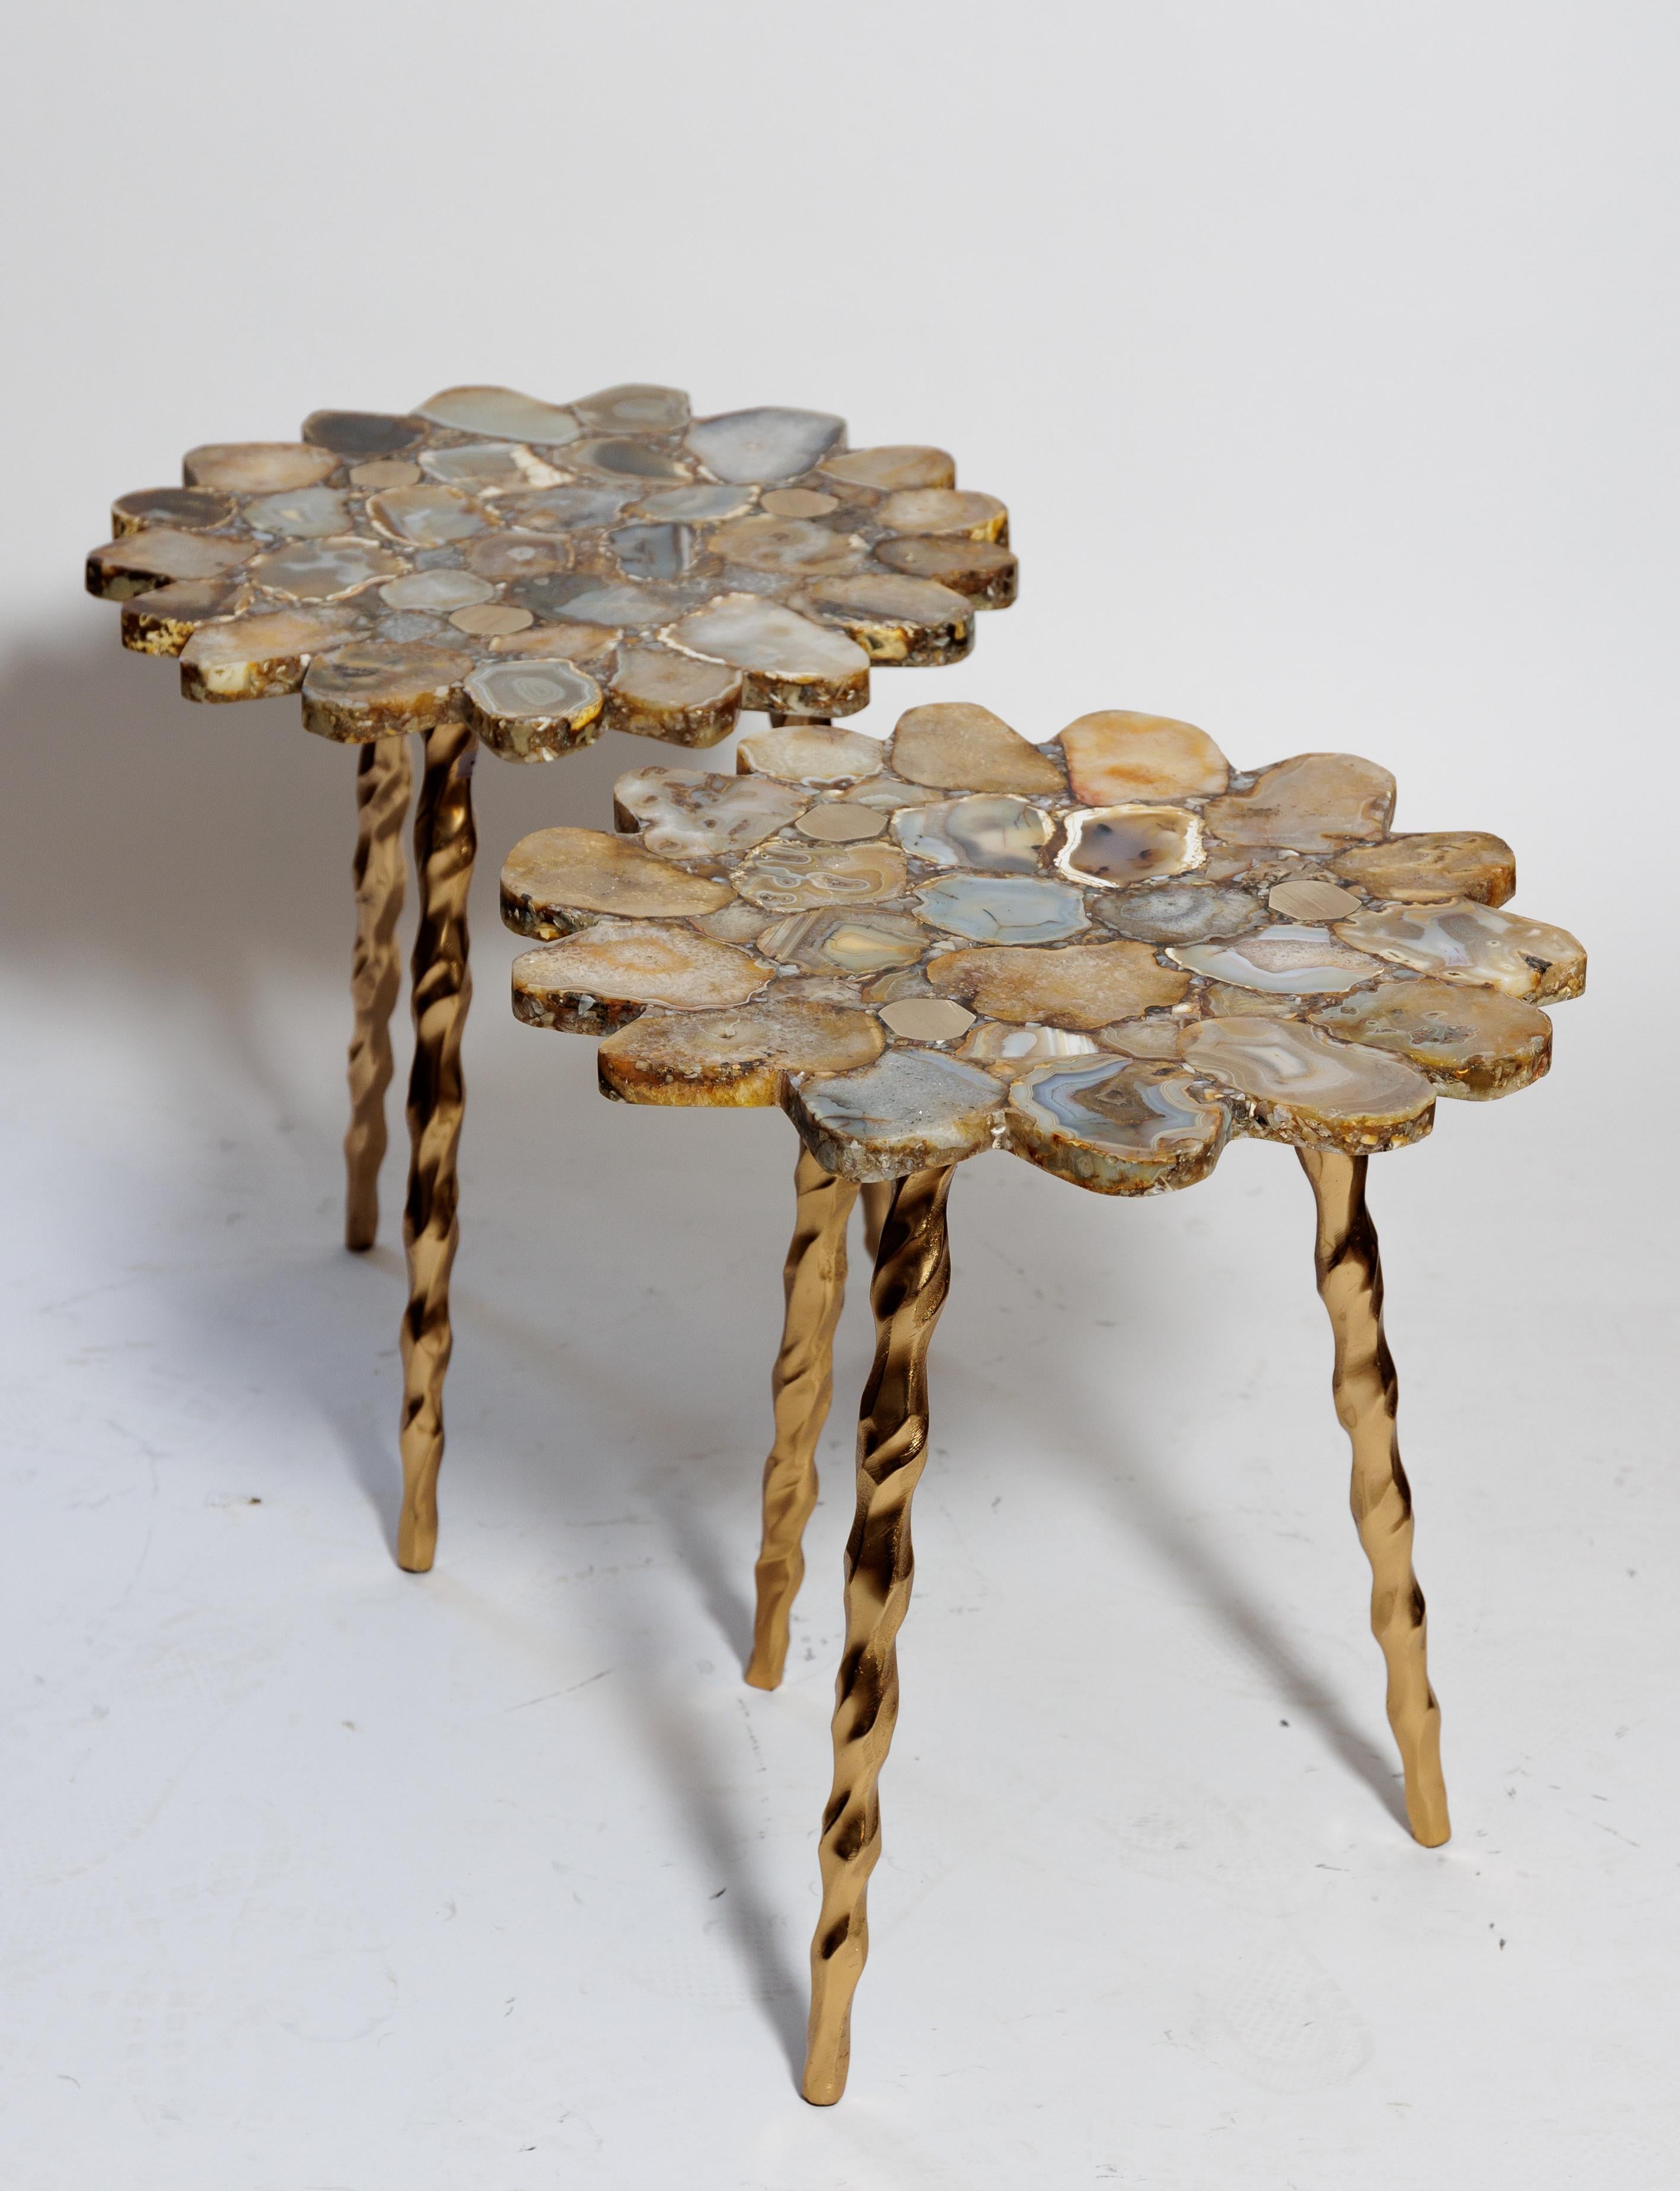 Other Beige Varieties of Natural Stone Top Table with Three Metal Leg Base For Sale